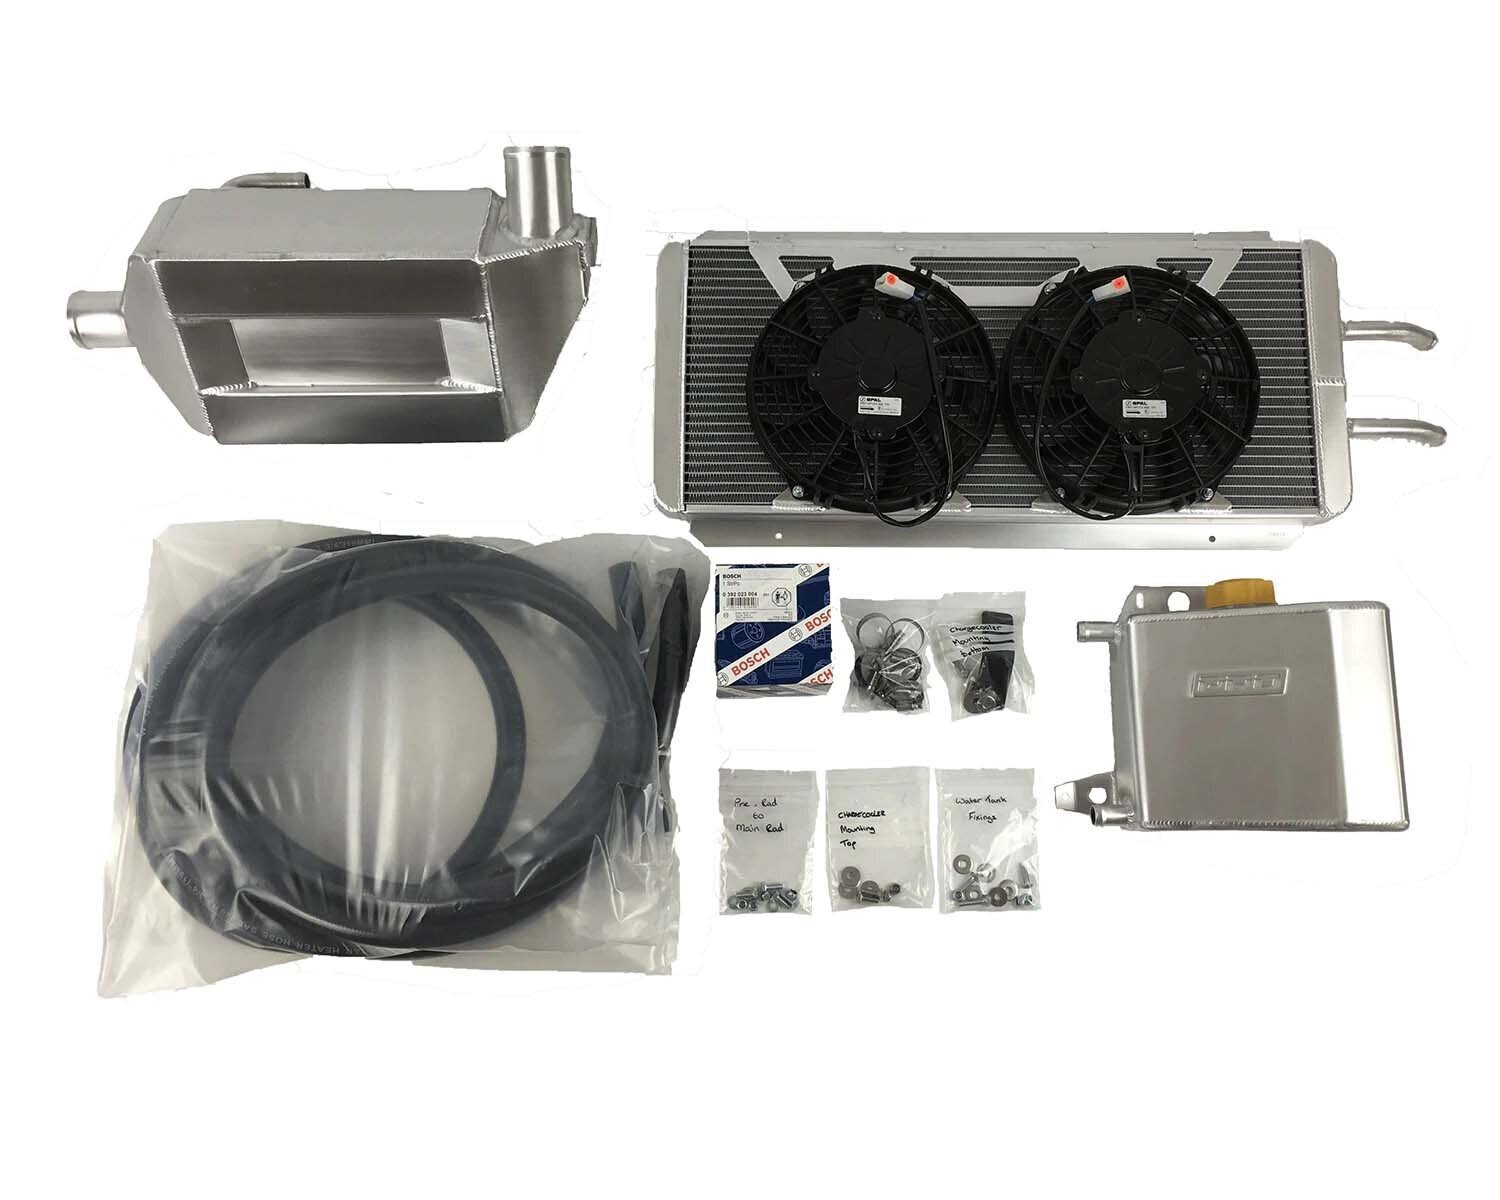 VX220 / Europa Pro alloy chargecooler system